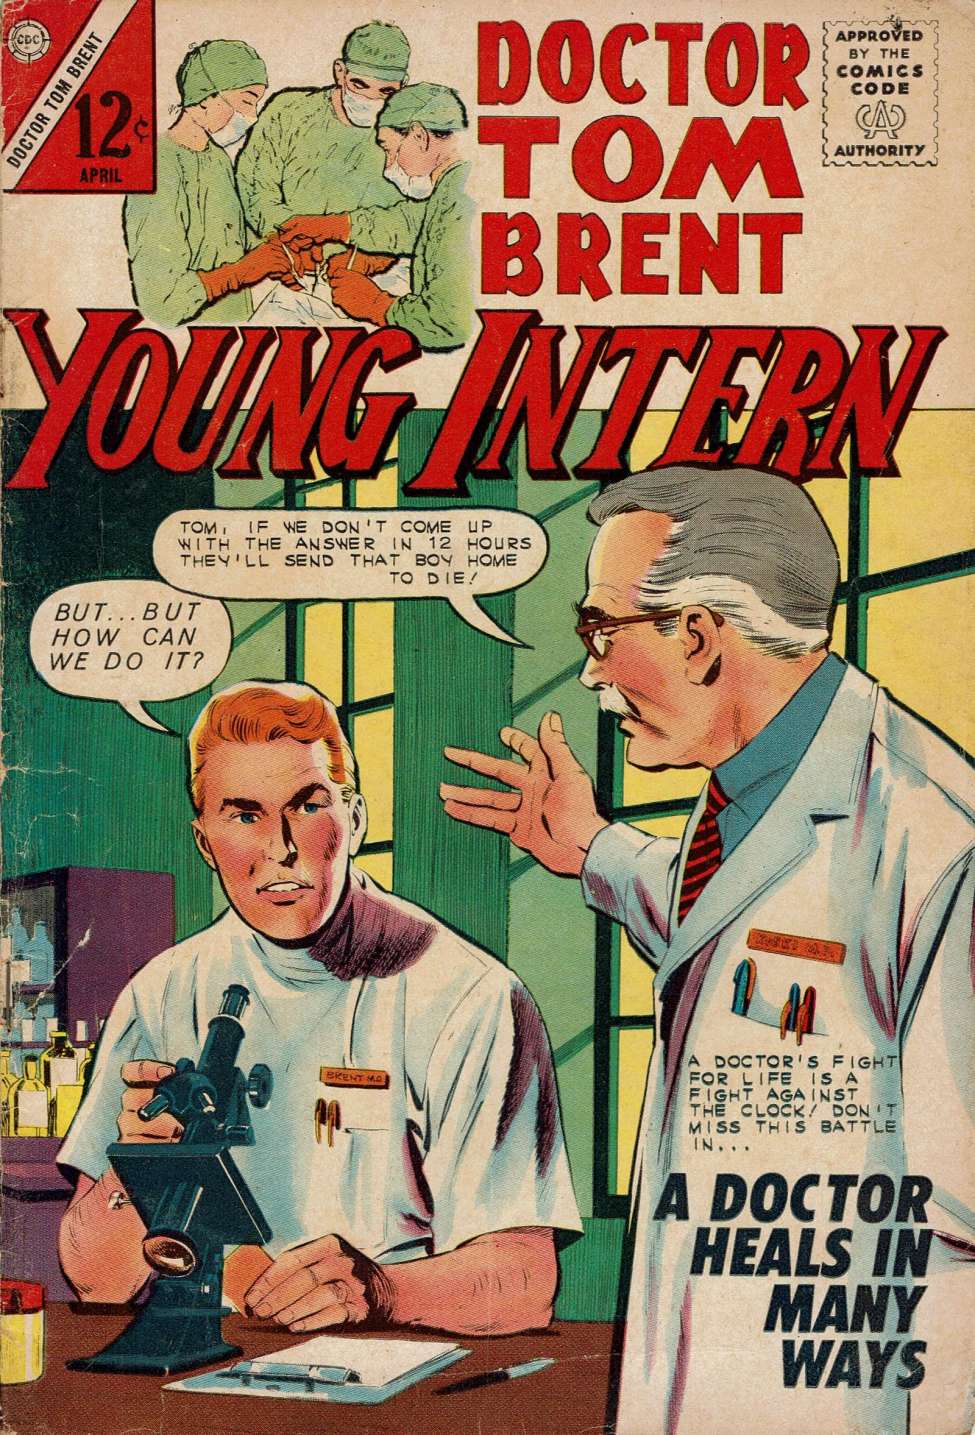 Book Cover For Doctor Tom Brent, Young Intern 2 - Version 1